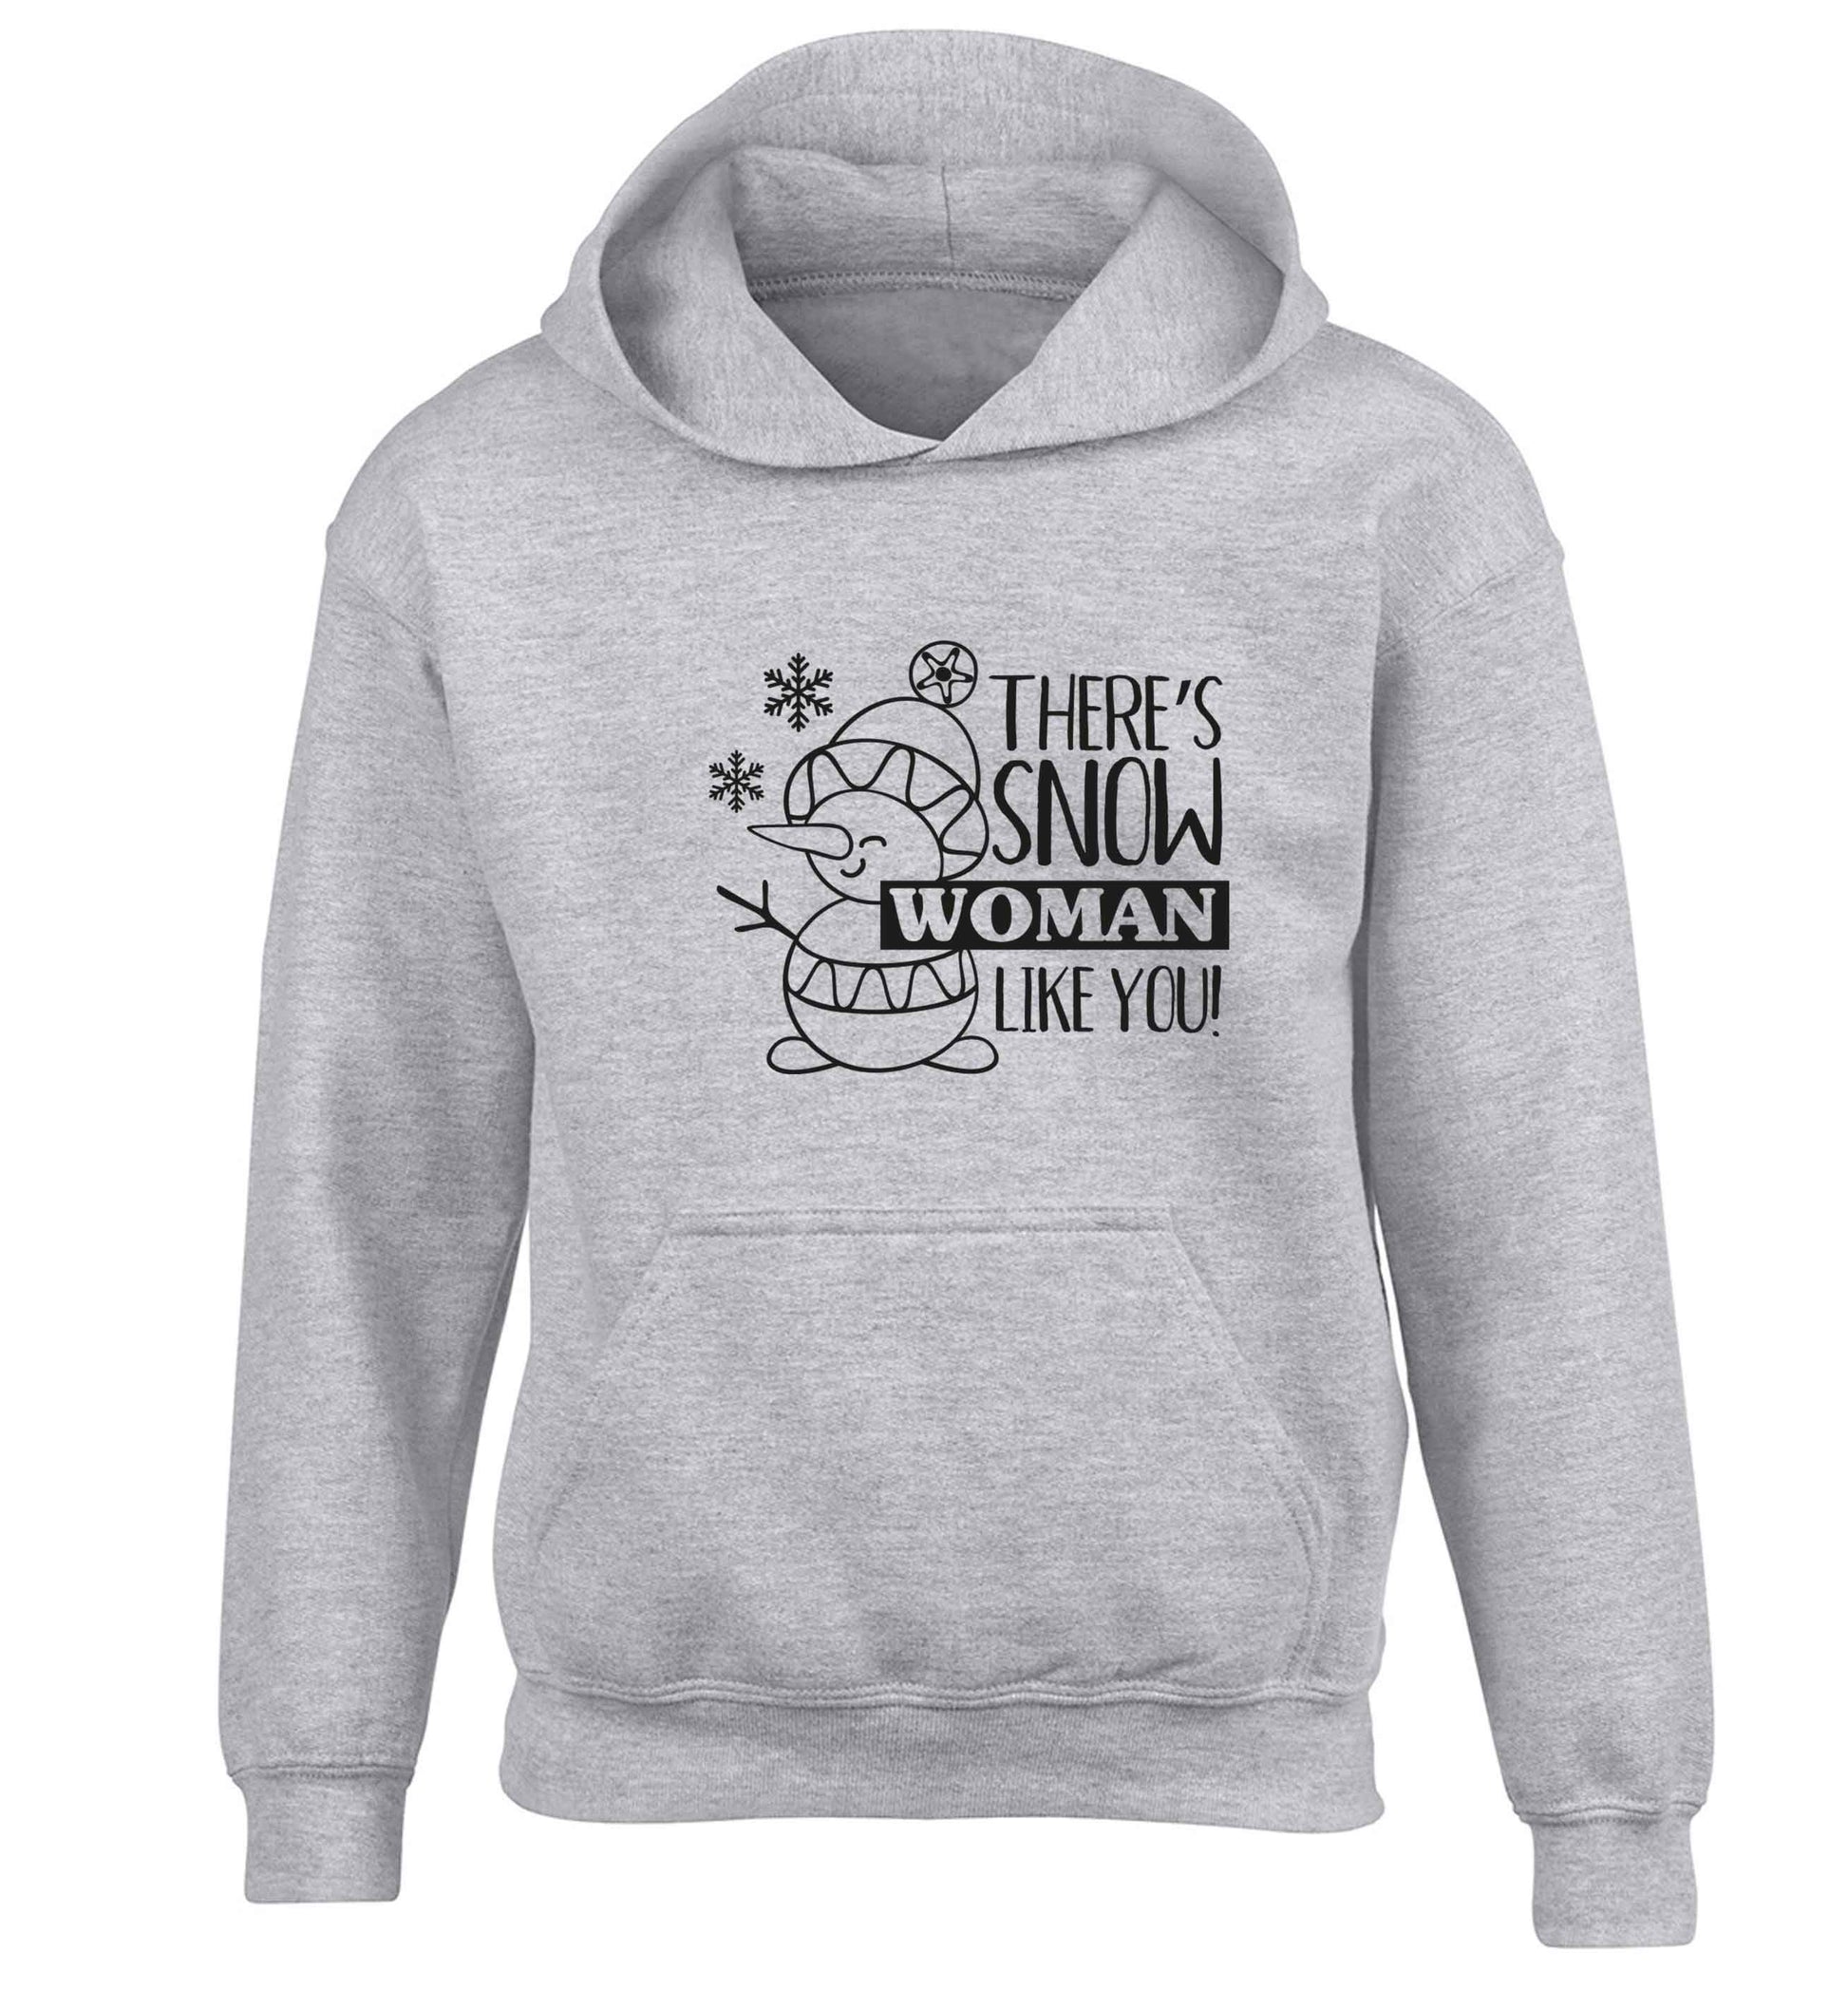 There's snow woman like you children's grey hoodie 12-13 Years